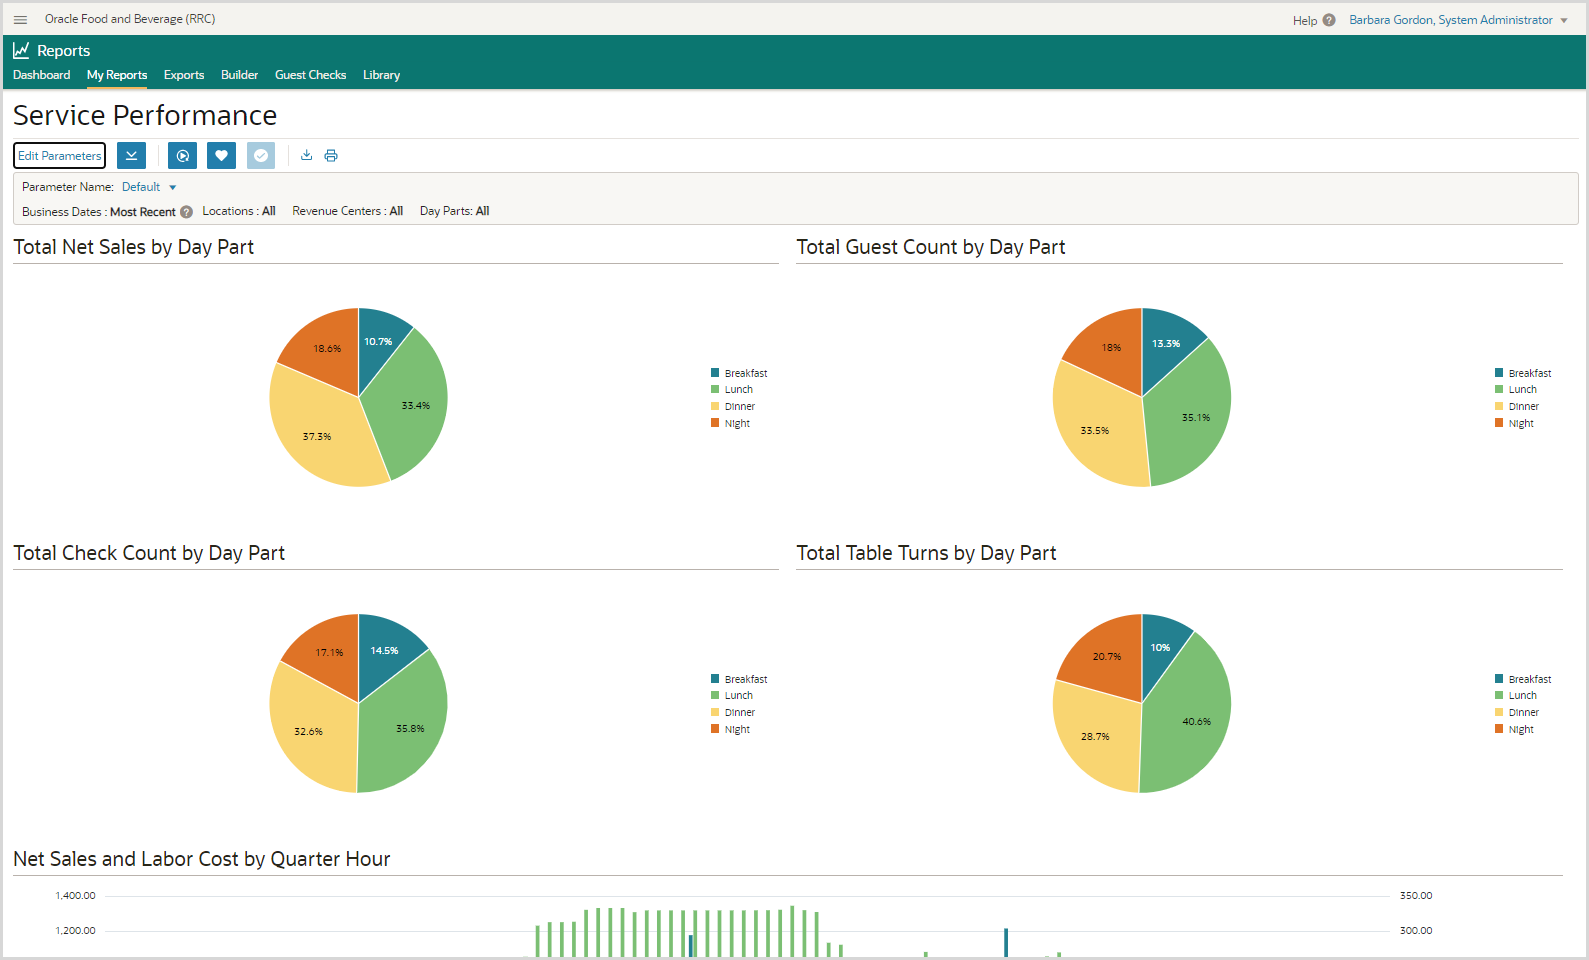 The image shows a Service Performance report in the Reporting and Analytics. The report has pie charts that are comprised of slices that correspond to day parts.